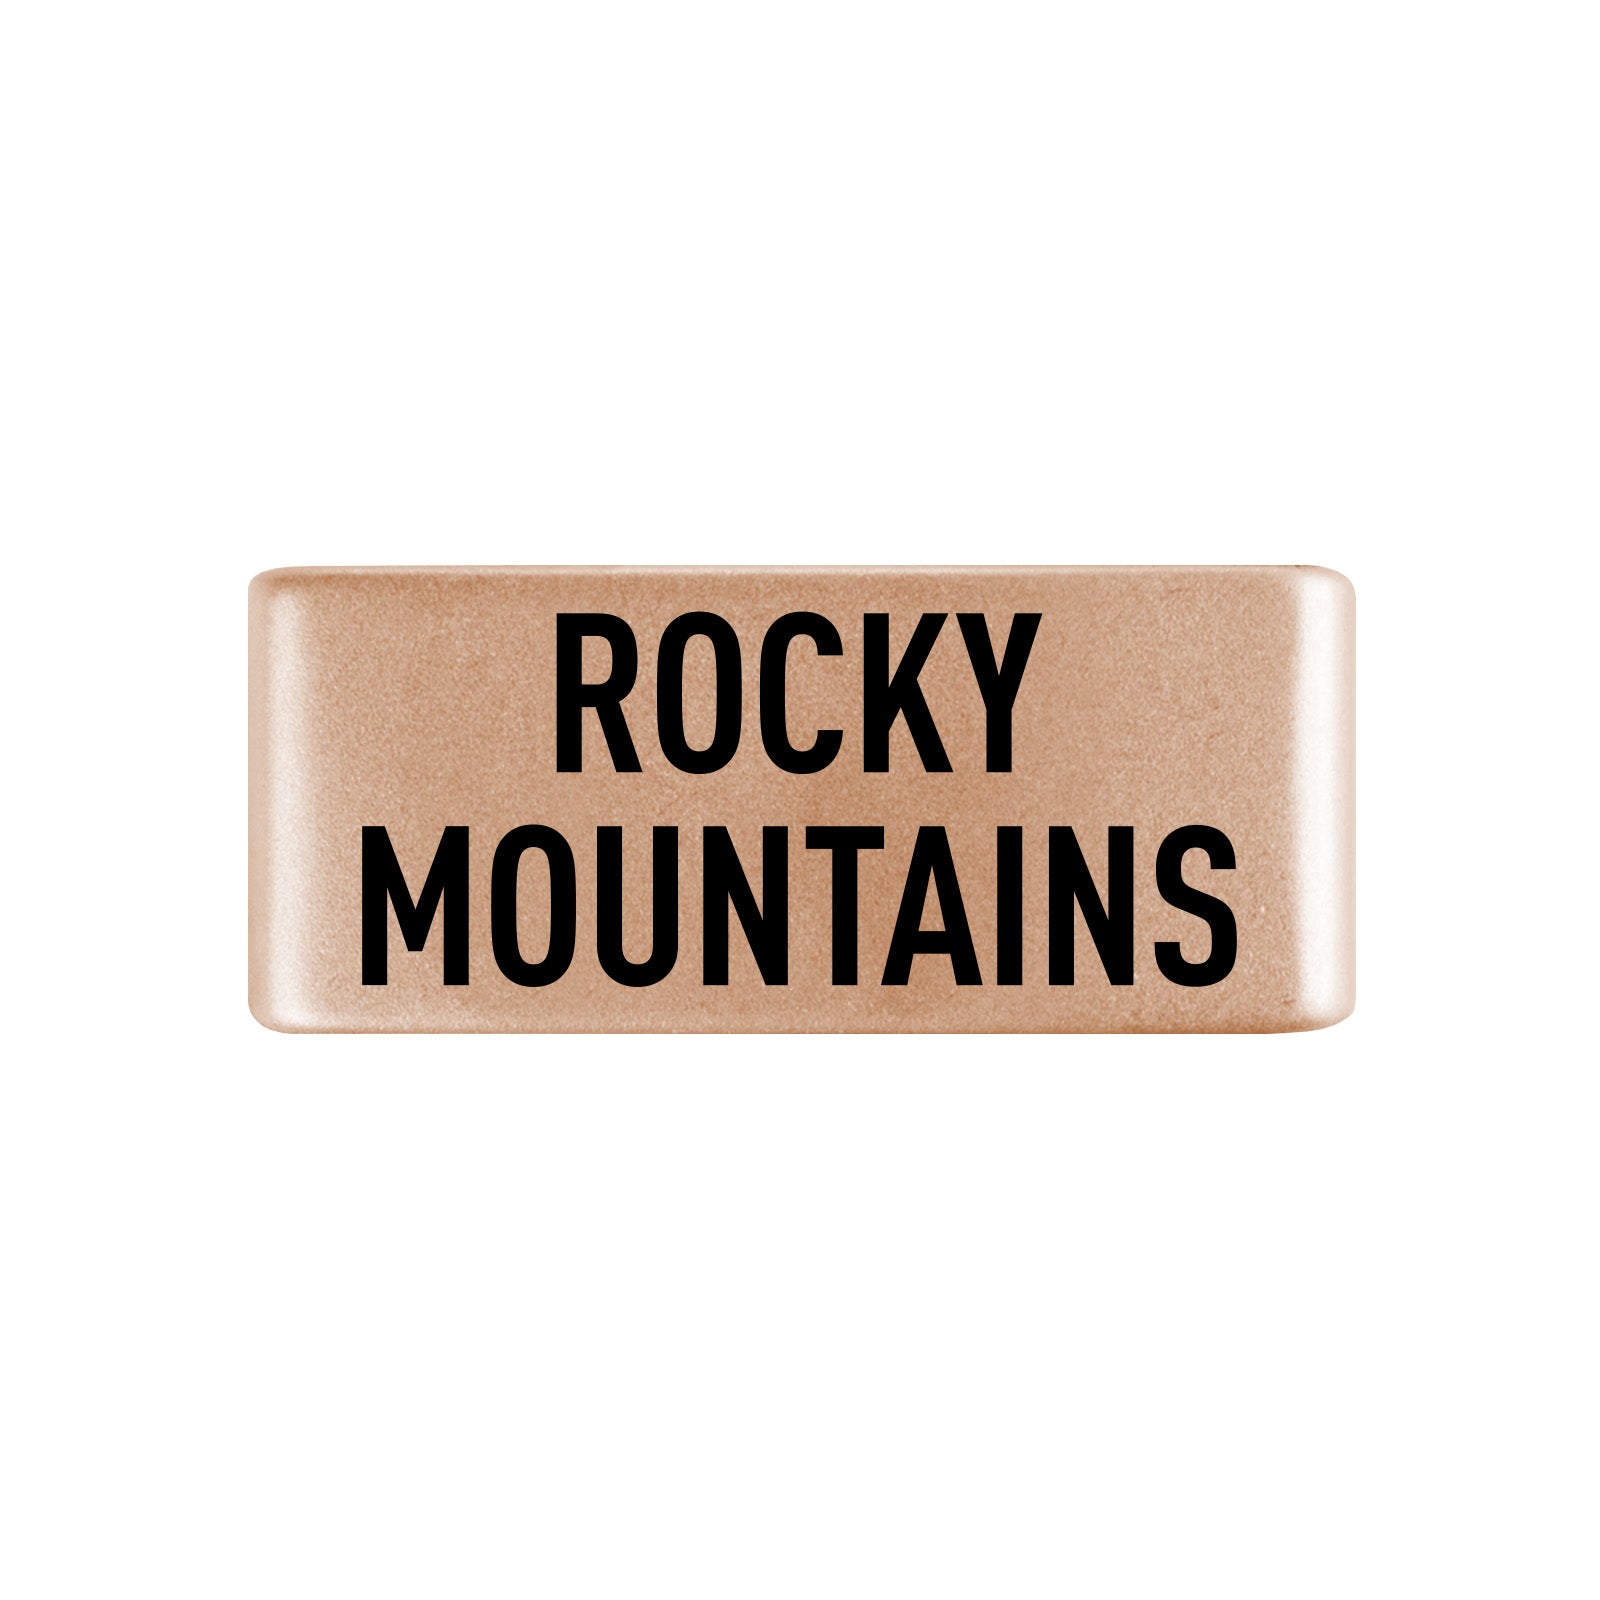 Rocky Mountains Badge Badge 13mm - ROAD iD